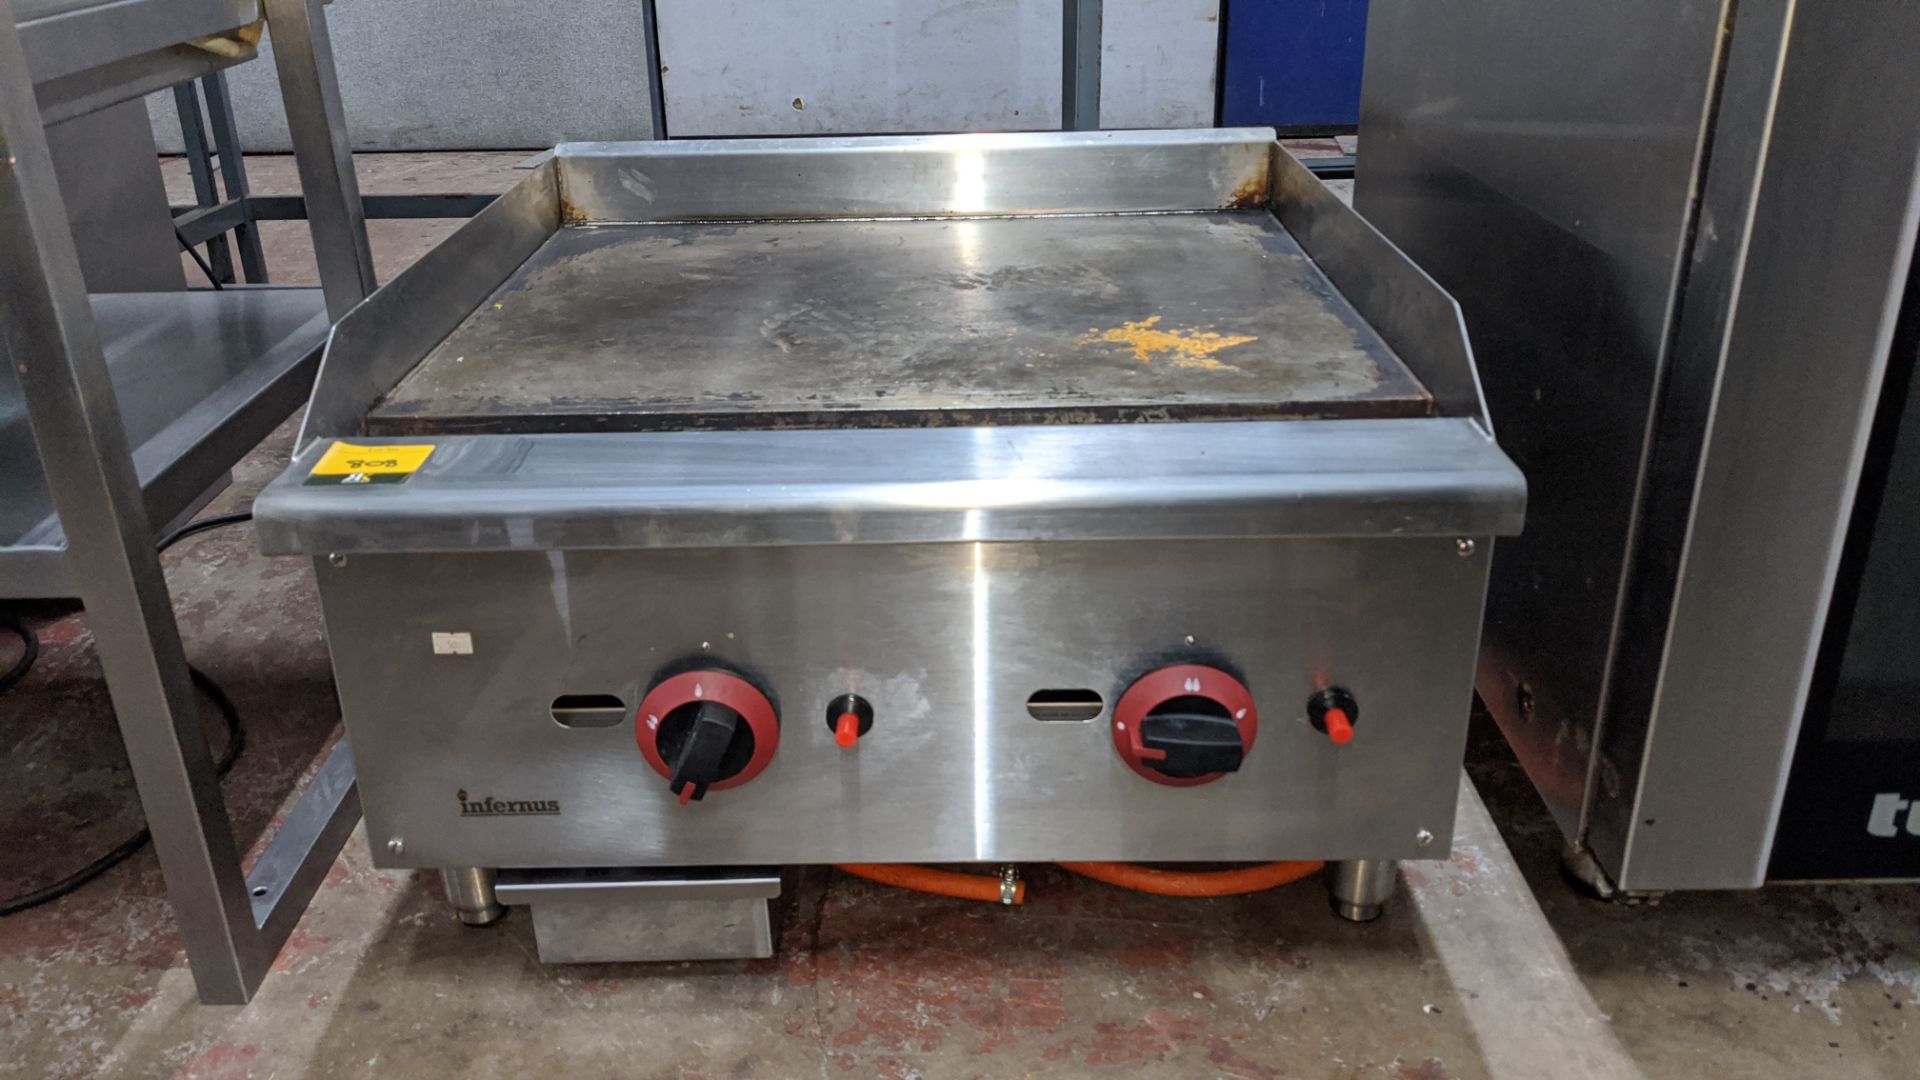 Infernus twin control benchtop 24" gas griddle model no. EGG-24SX. Lots 808 - 812 are understood - Image 3 of 5